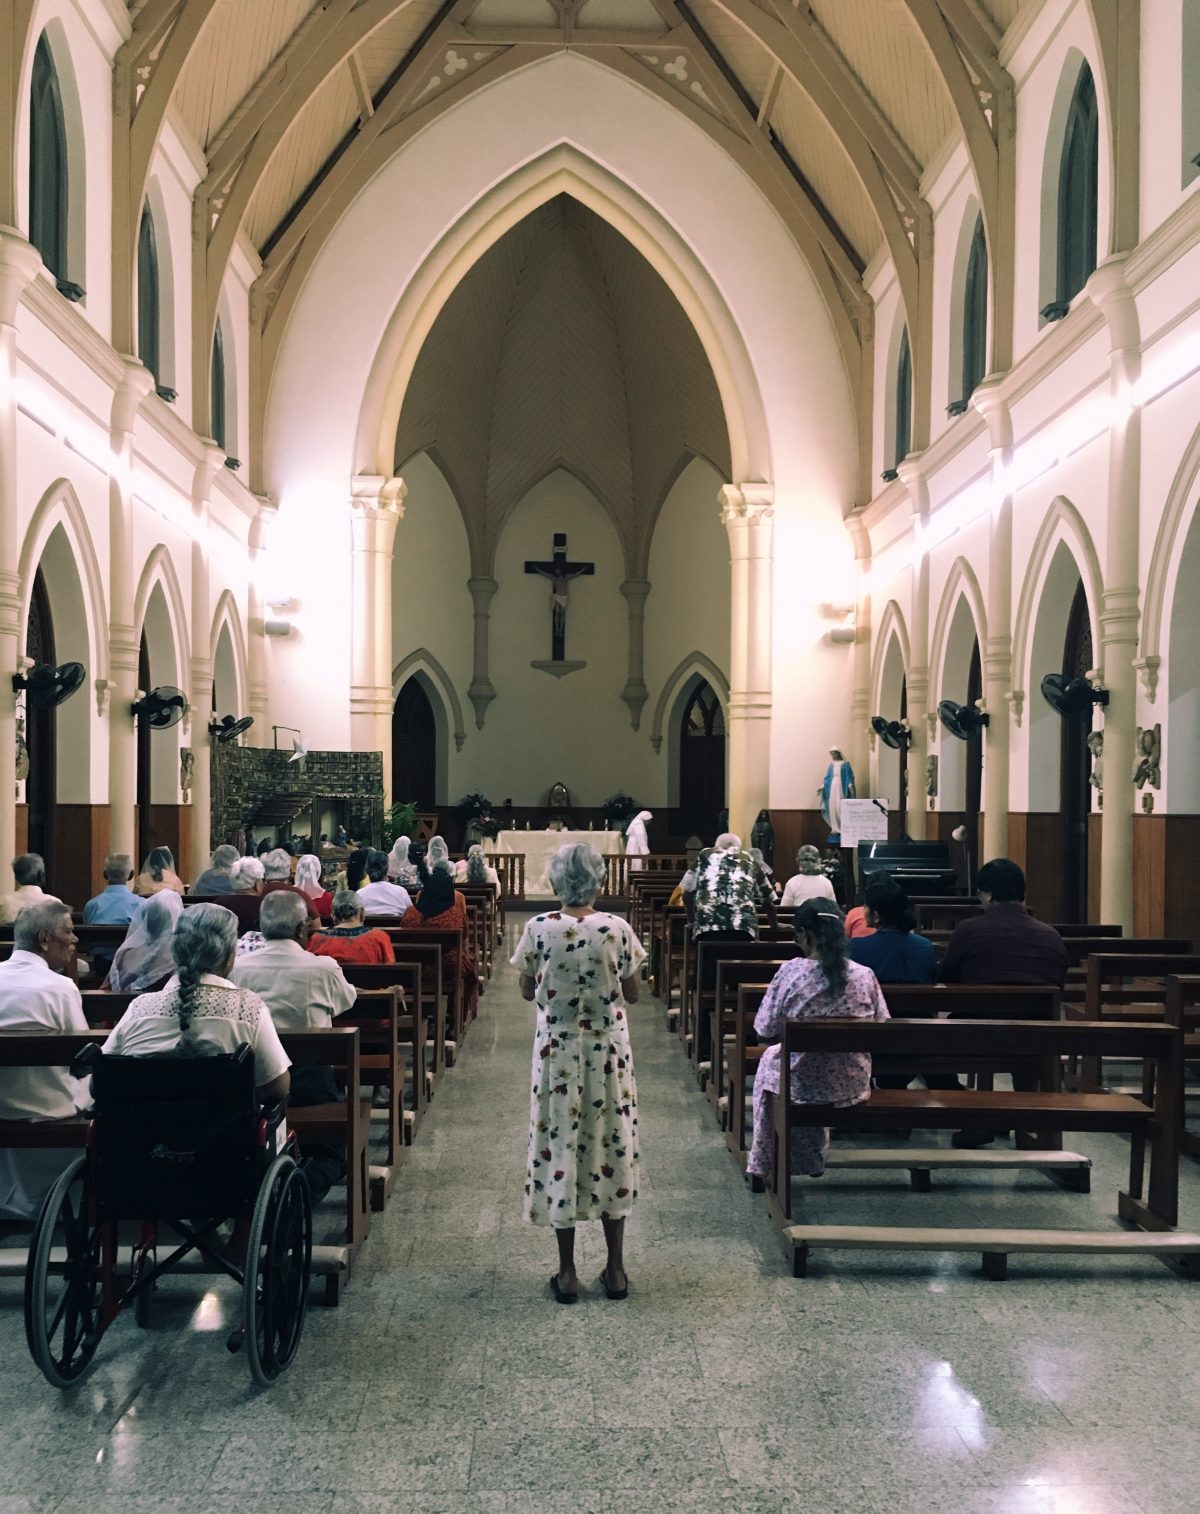 The residents at St. Mary's Home for the Elderly run by the Little Sisters of the Poor off Darley Road, Maradana, gather for midnight mass. Image courtesy: Minaali Haputantri / Roar.lk